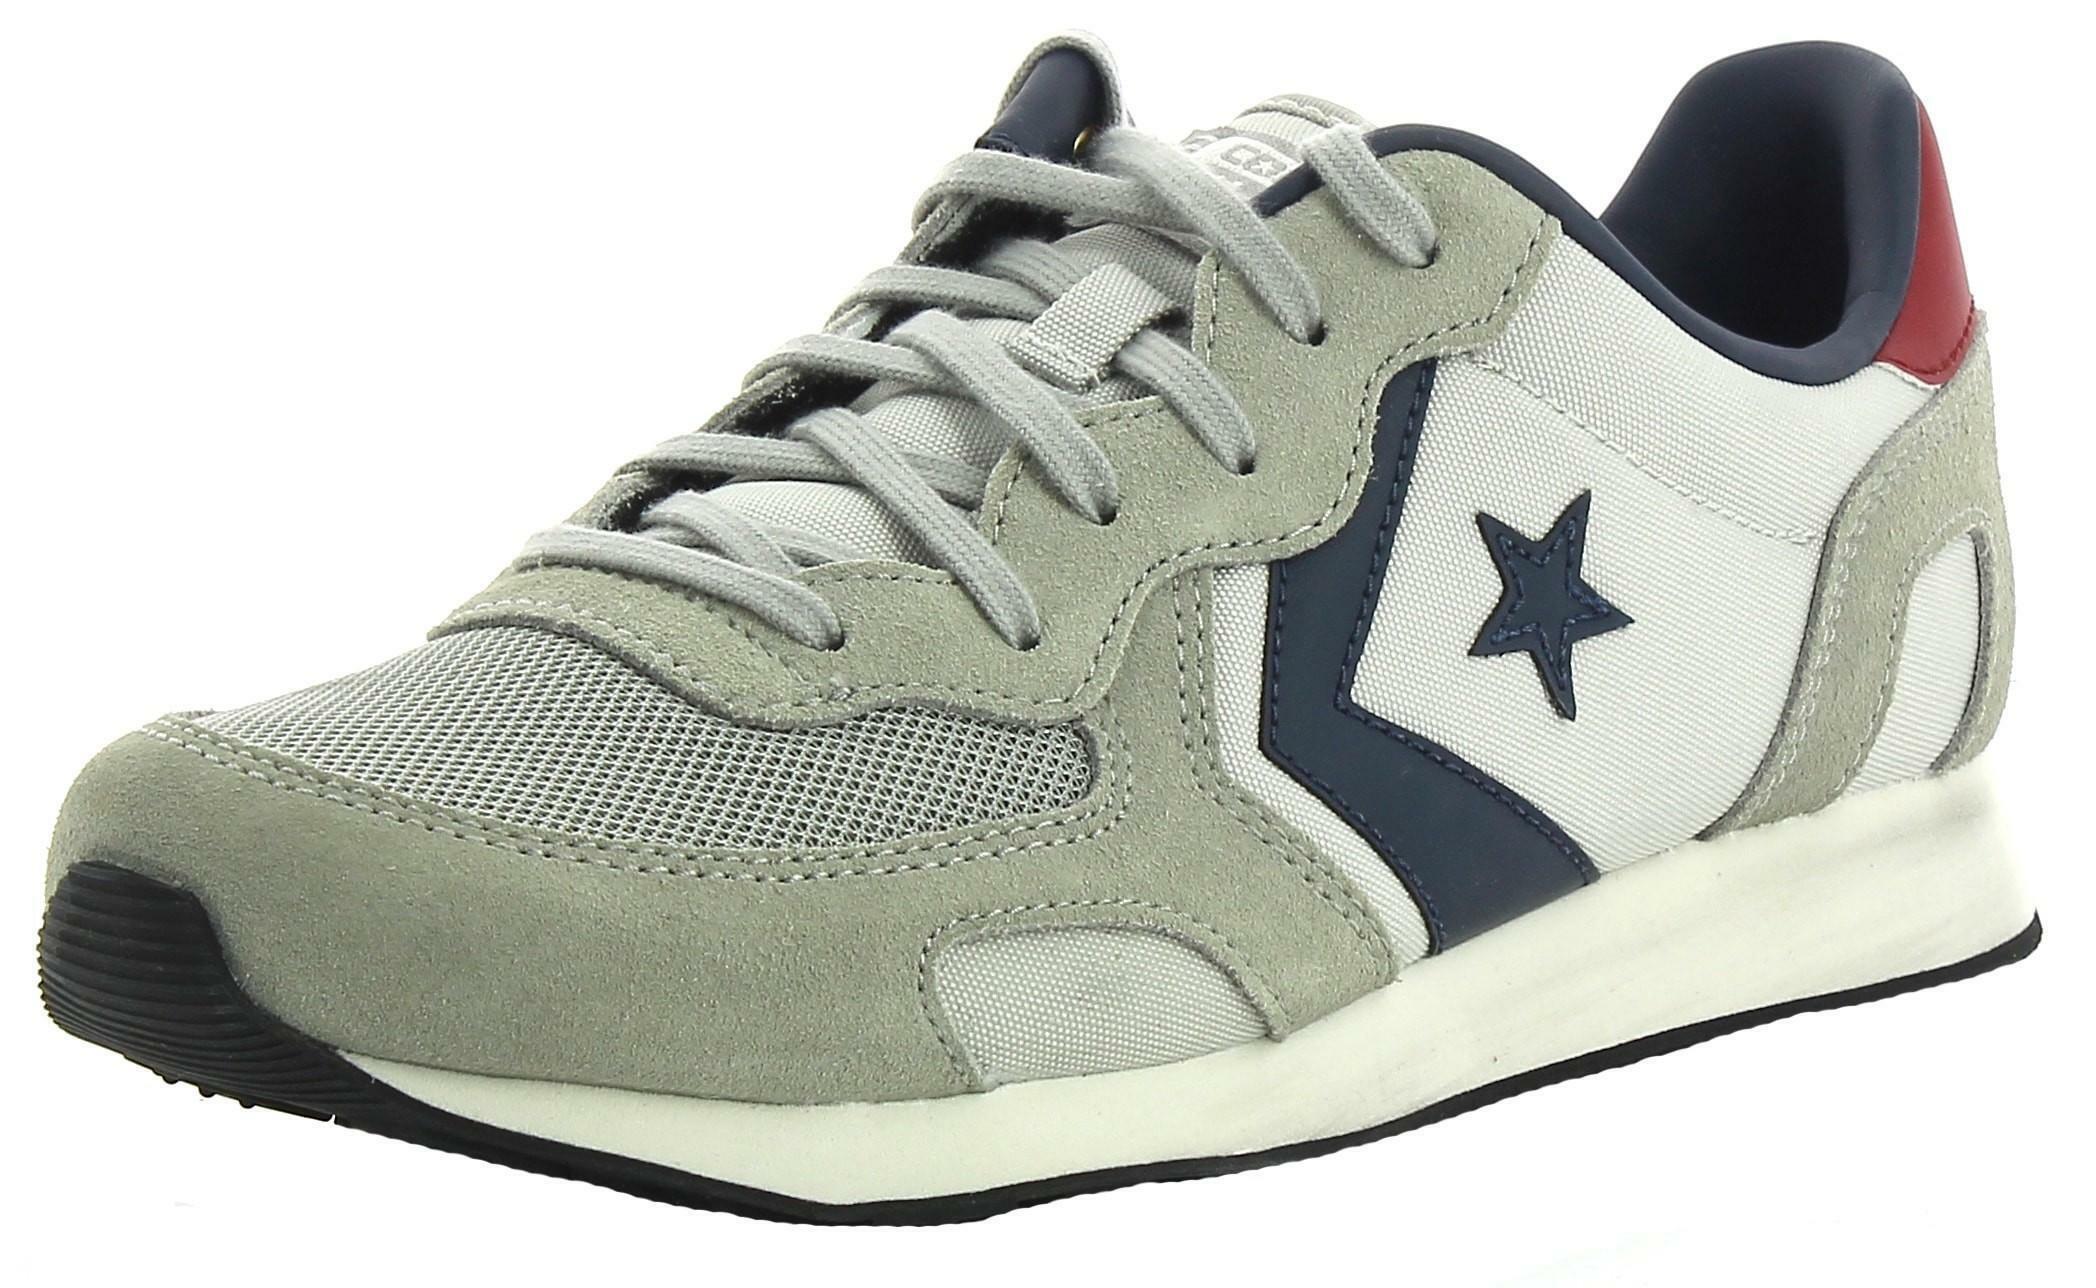 converse auckland racer sneakers